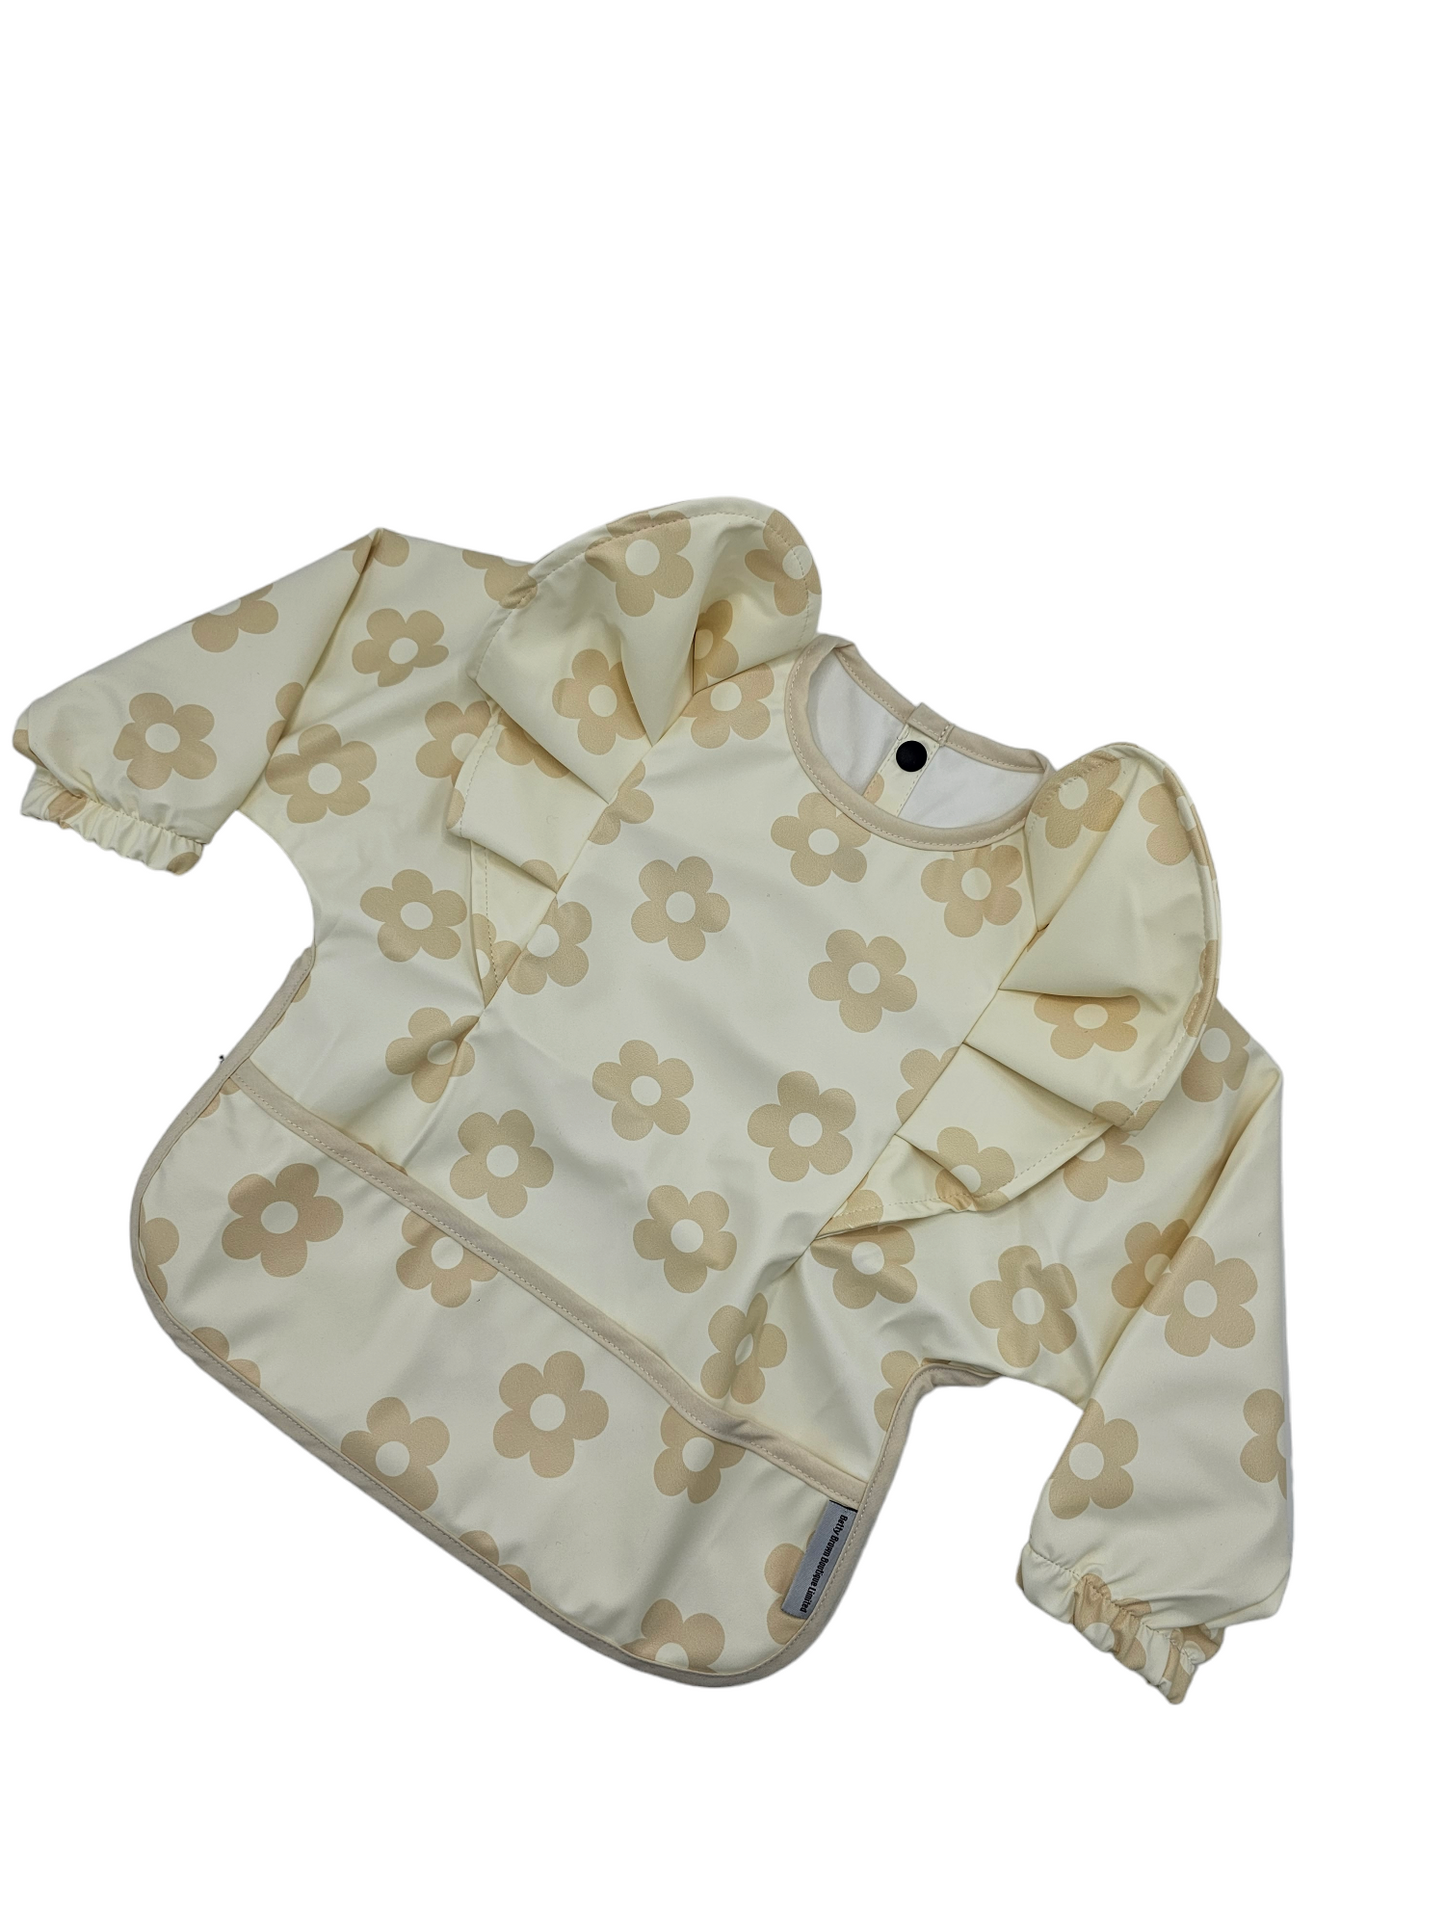 Neutral Daisy Print Frill Detail Waterproof Bib with Sleeves - Betty Brown Boutique Ltd